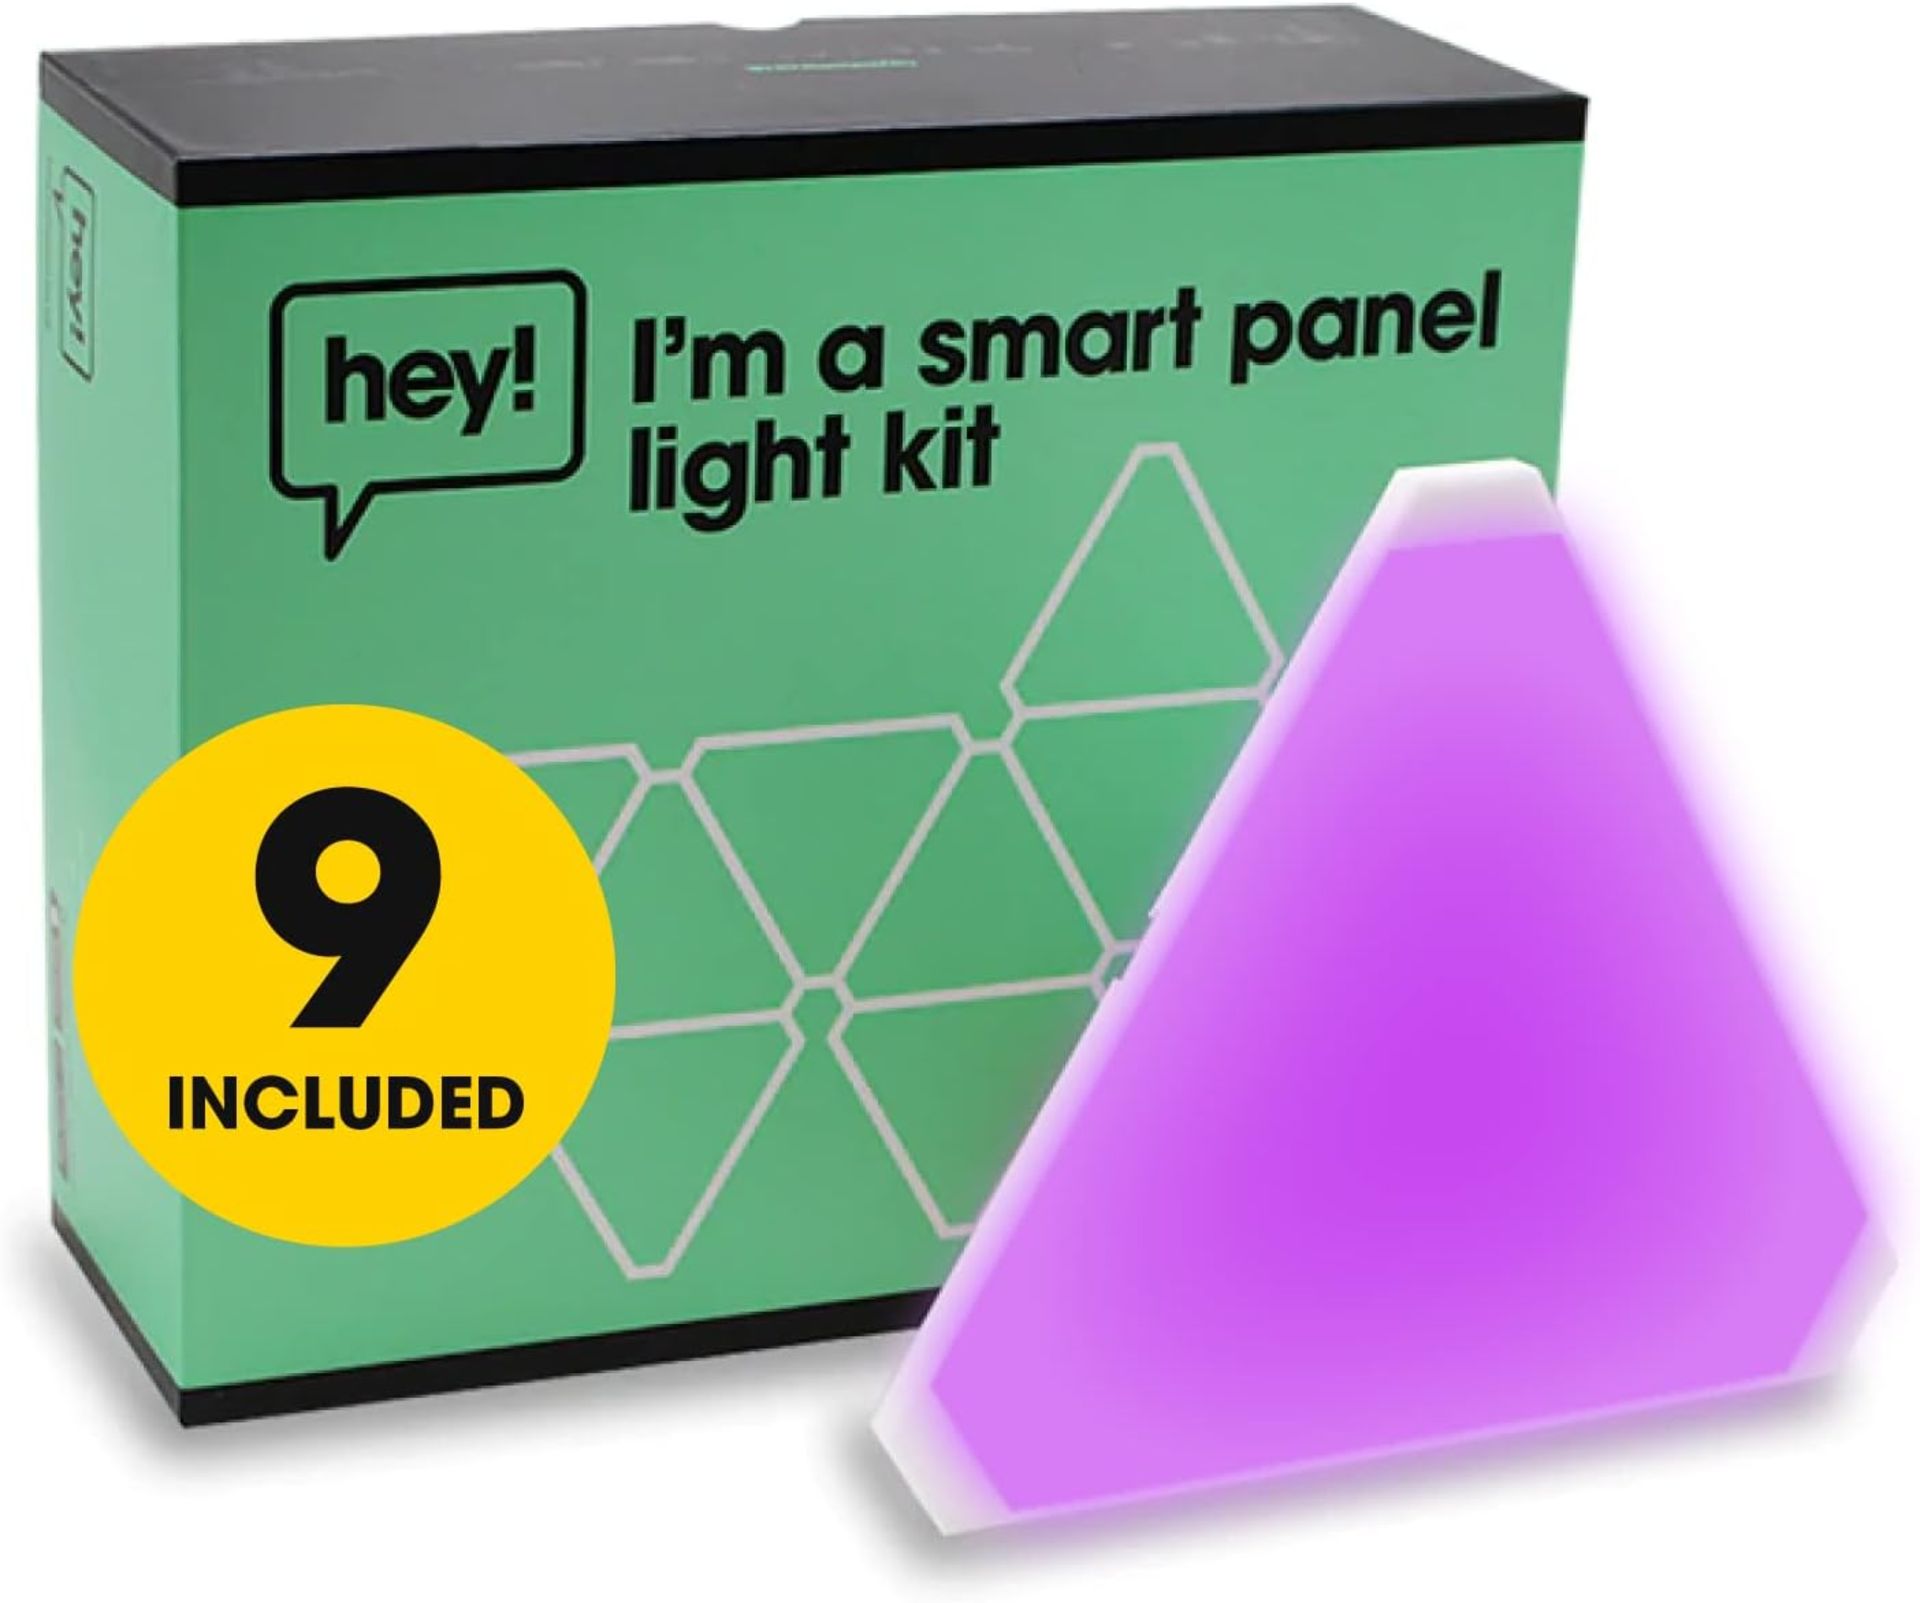 NEW & BOXED HEY! SMART LED RGBW Panel Lighting Kit. RRP £119.99 EACH. Dimmable RGB Lights: For